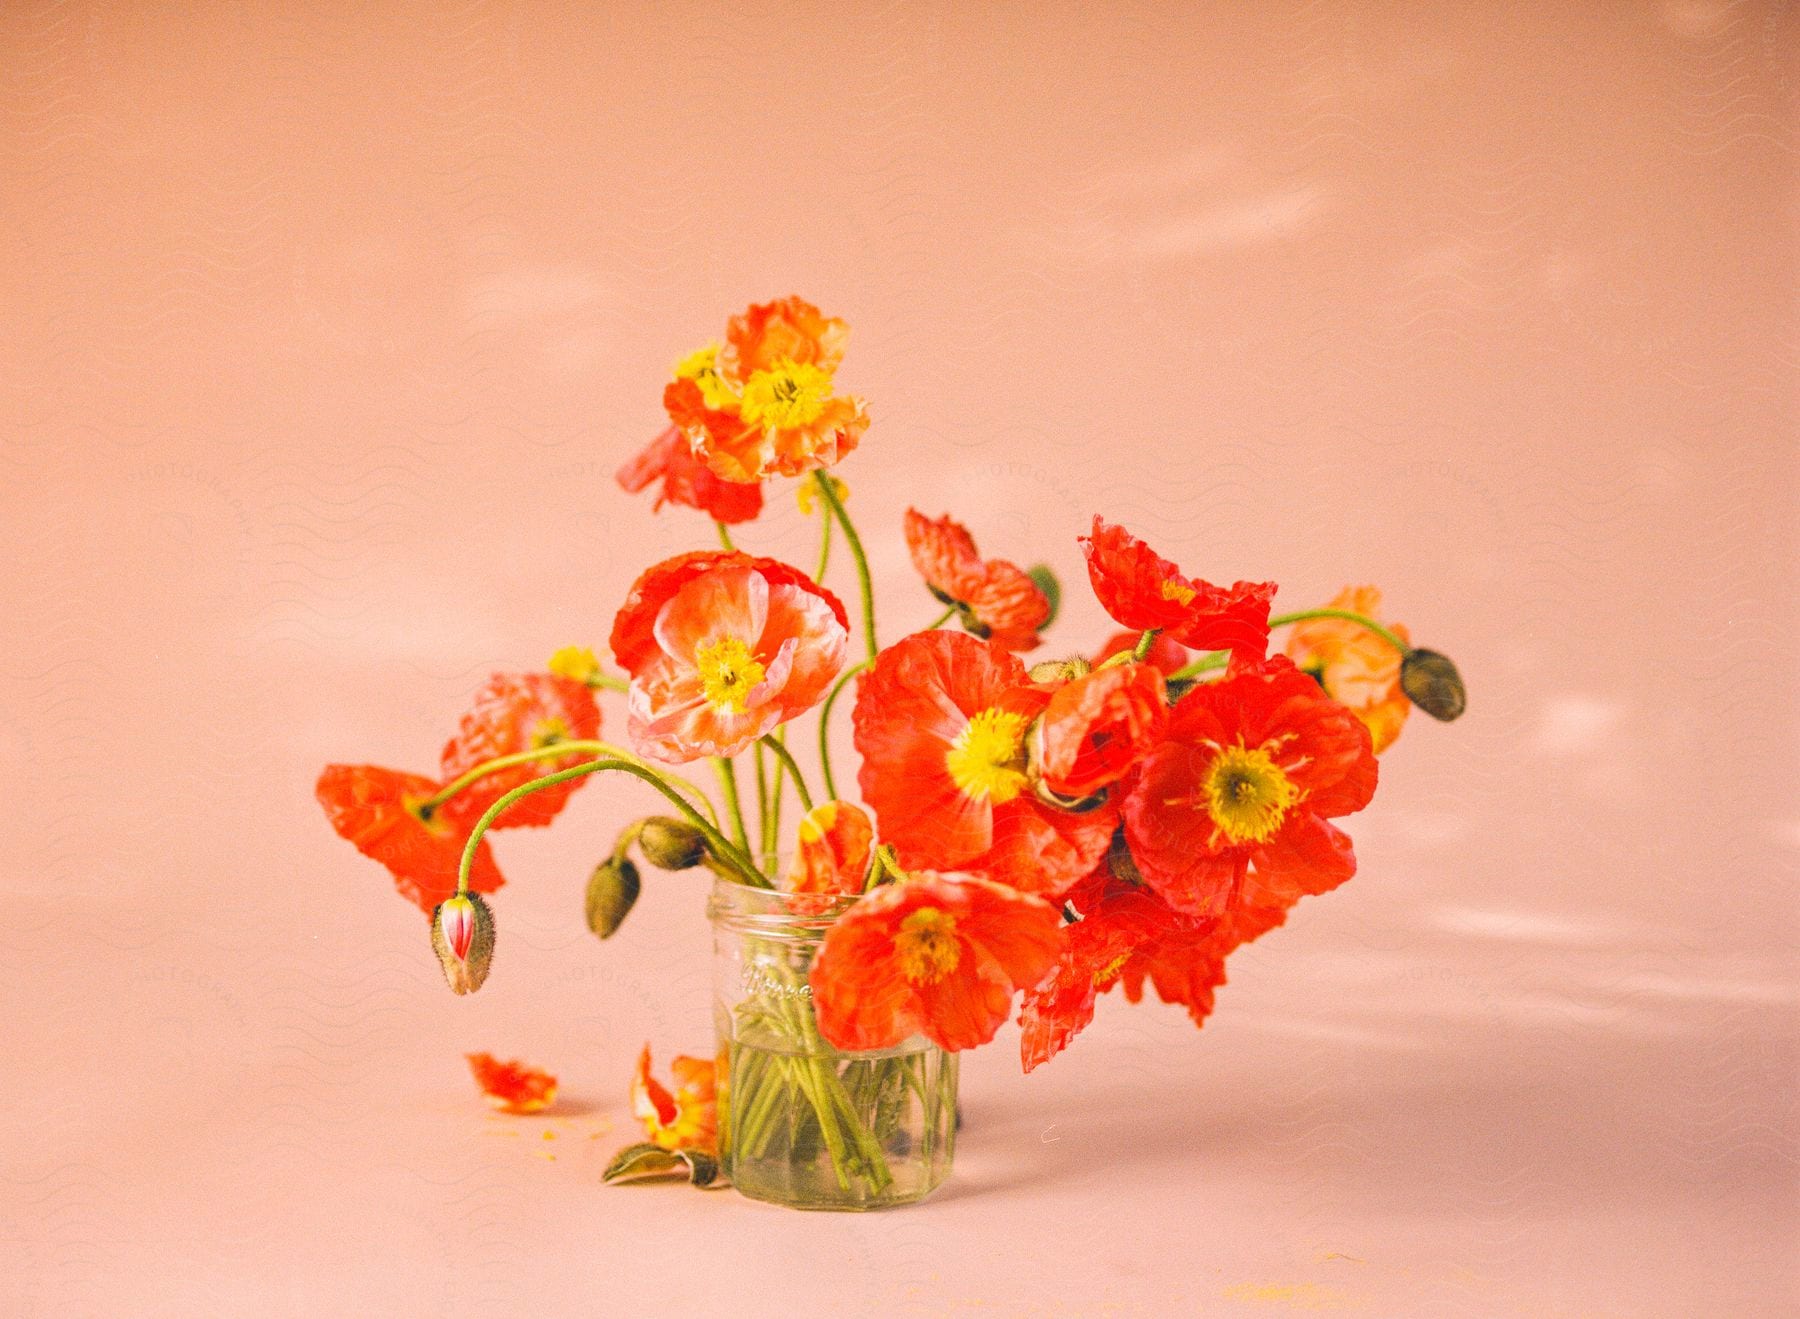 A wilting bouquet of red and yellow flowers sits in a vase against a pink background.